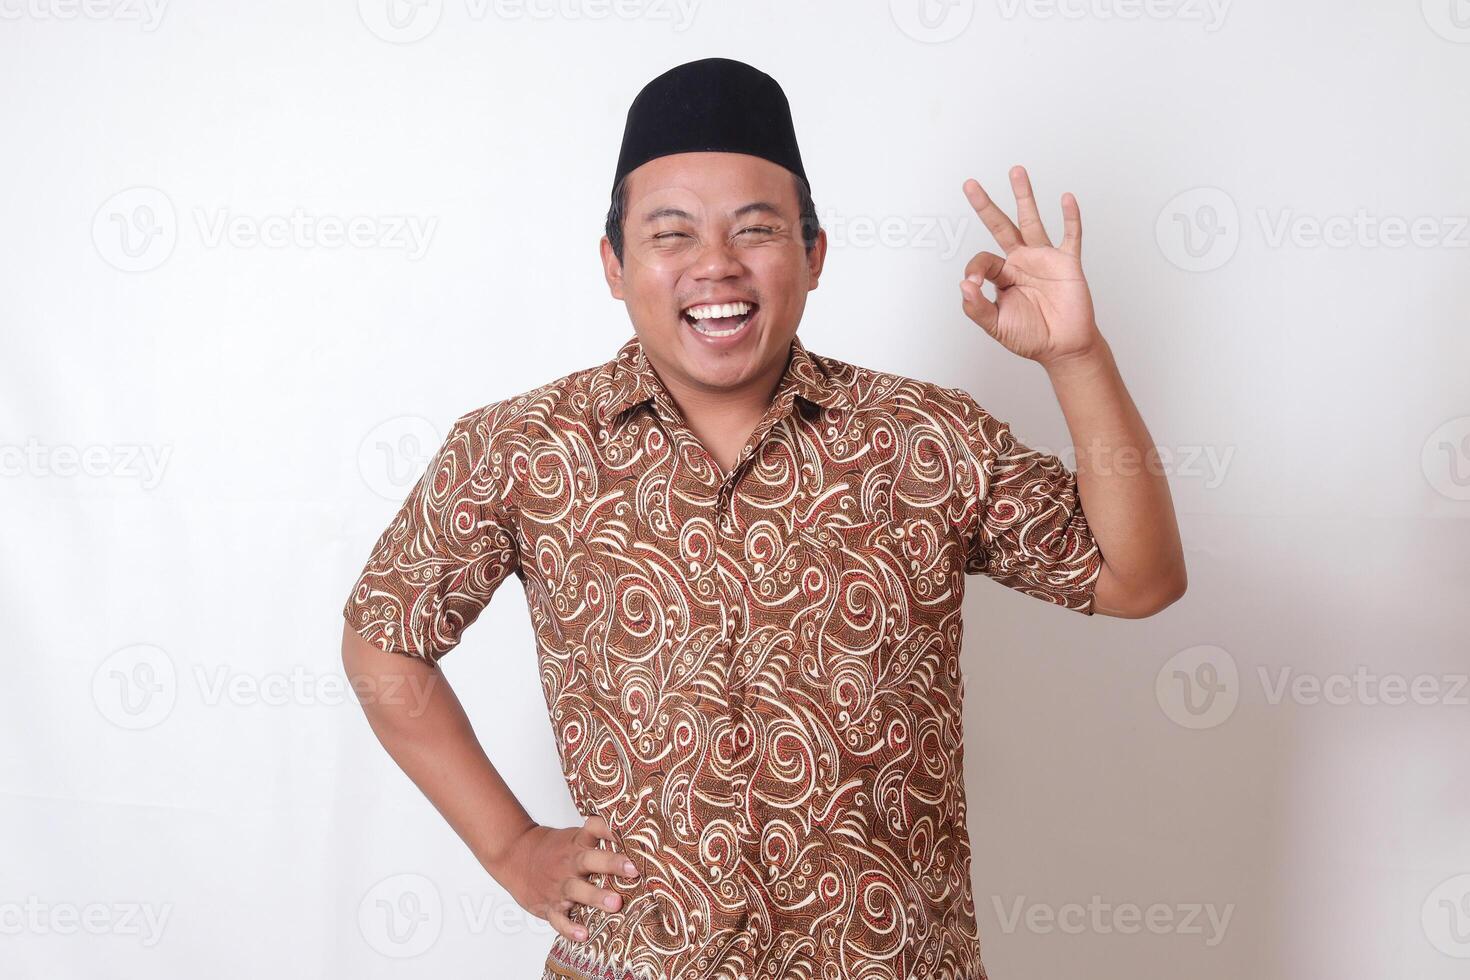 Portrait of excited Asian man wearing batik shirt and songkok showing ok hand gesture and smiling looking at camera. Isolated image on gray background photo